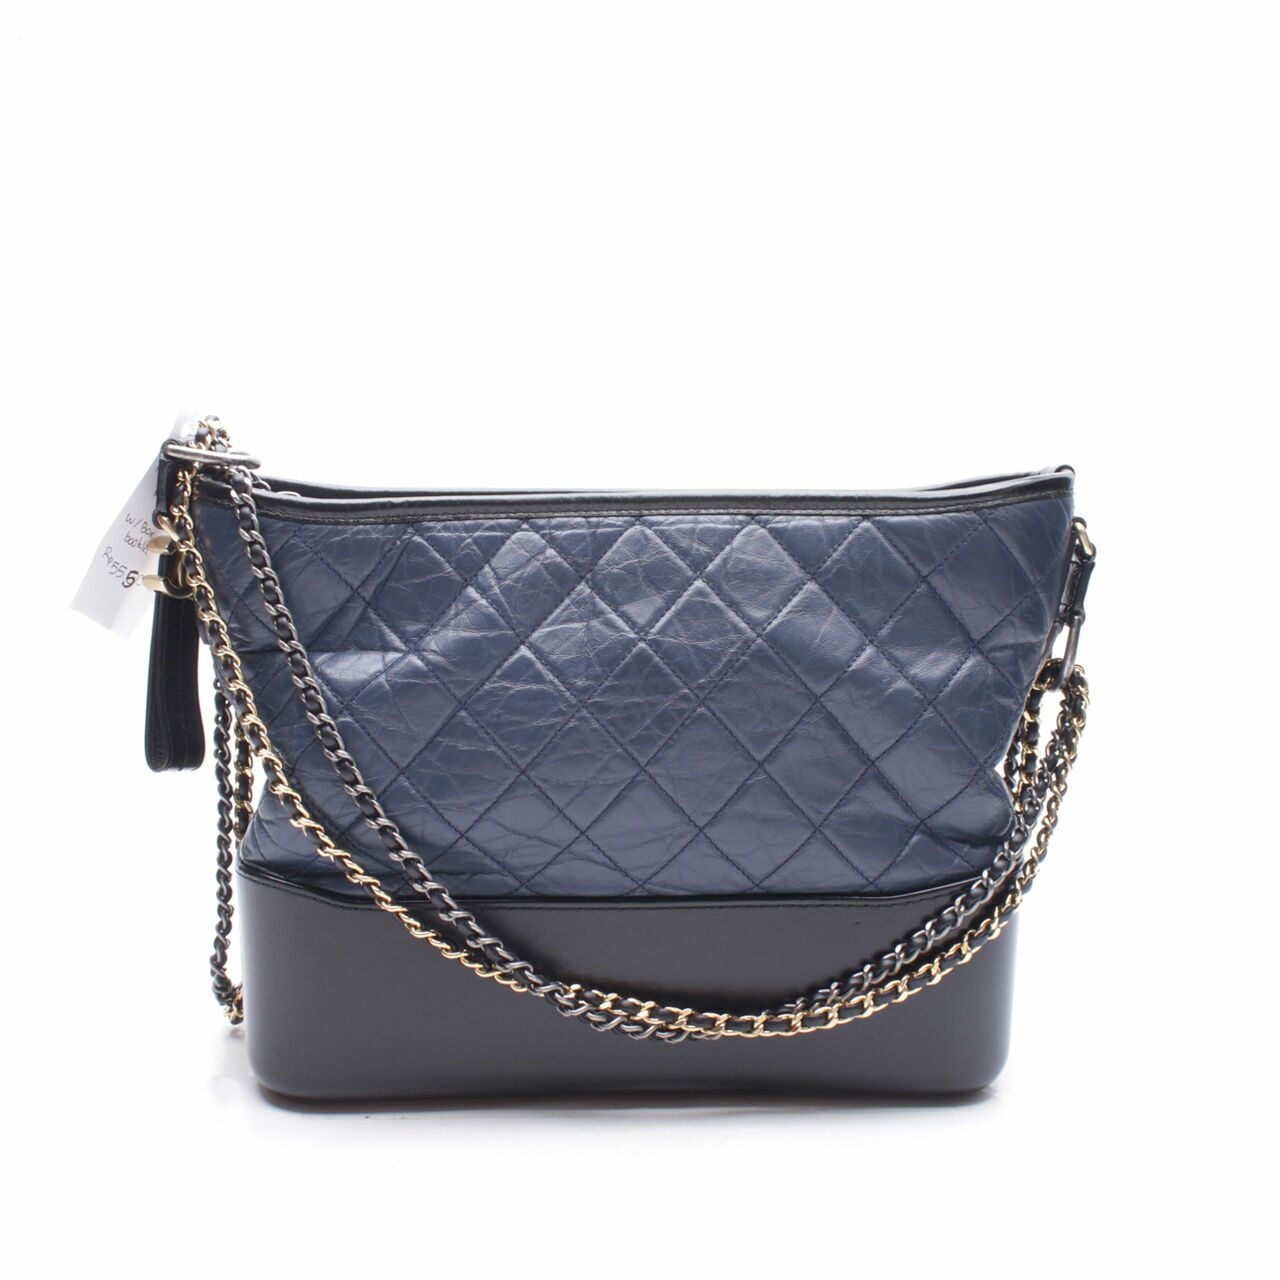 Chanel Gabrielle Hobo Navy/Black with Mixed Hardware Shoulder Bag